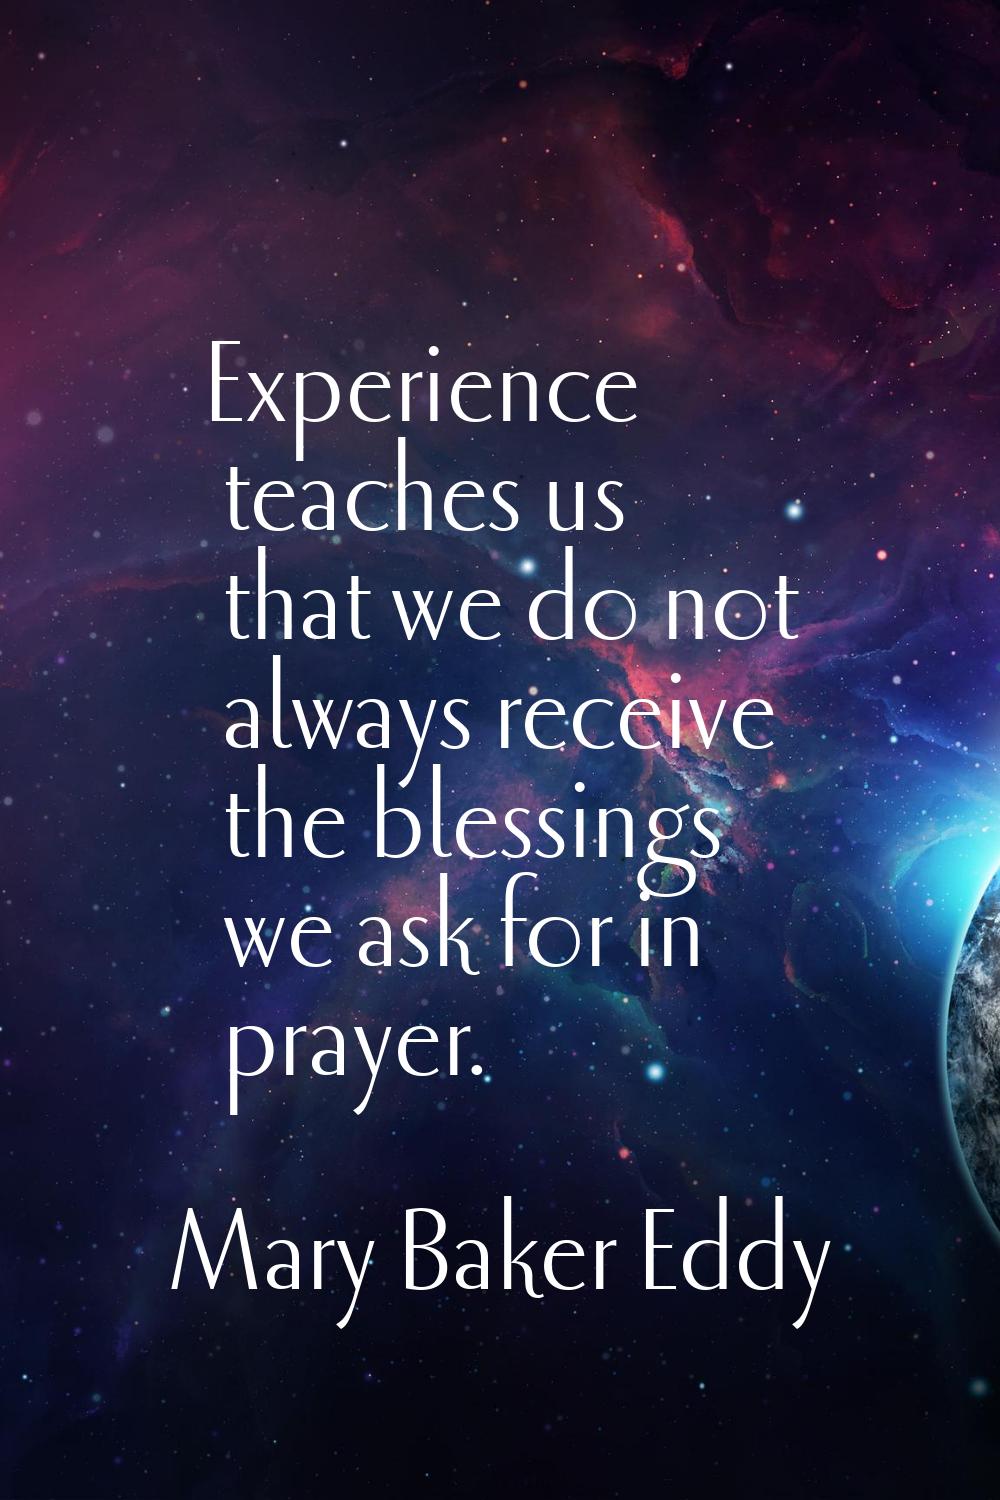 Experience teaches us that we do not always receive the blessings we ask for in prayer.